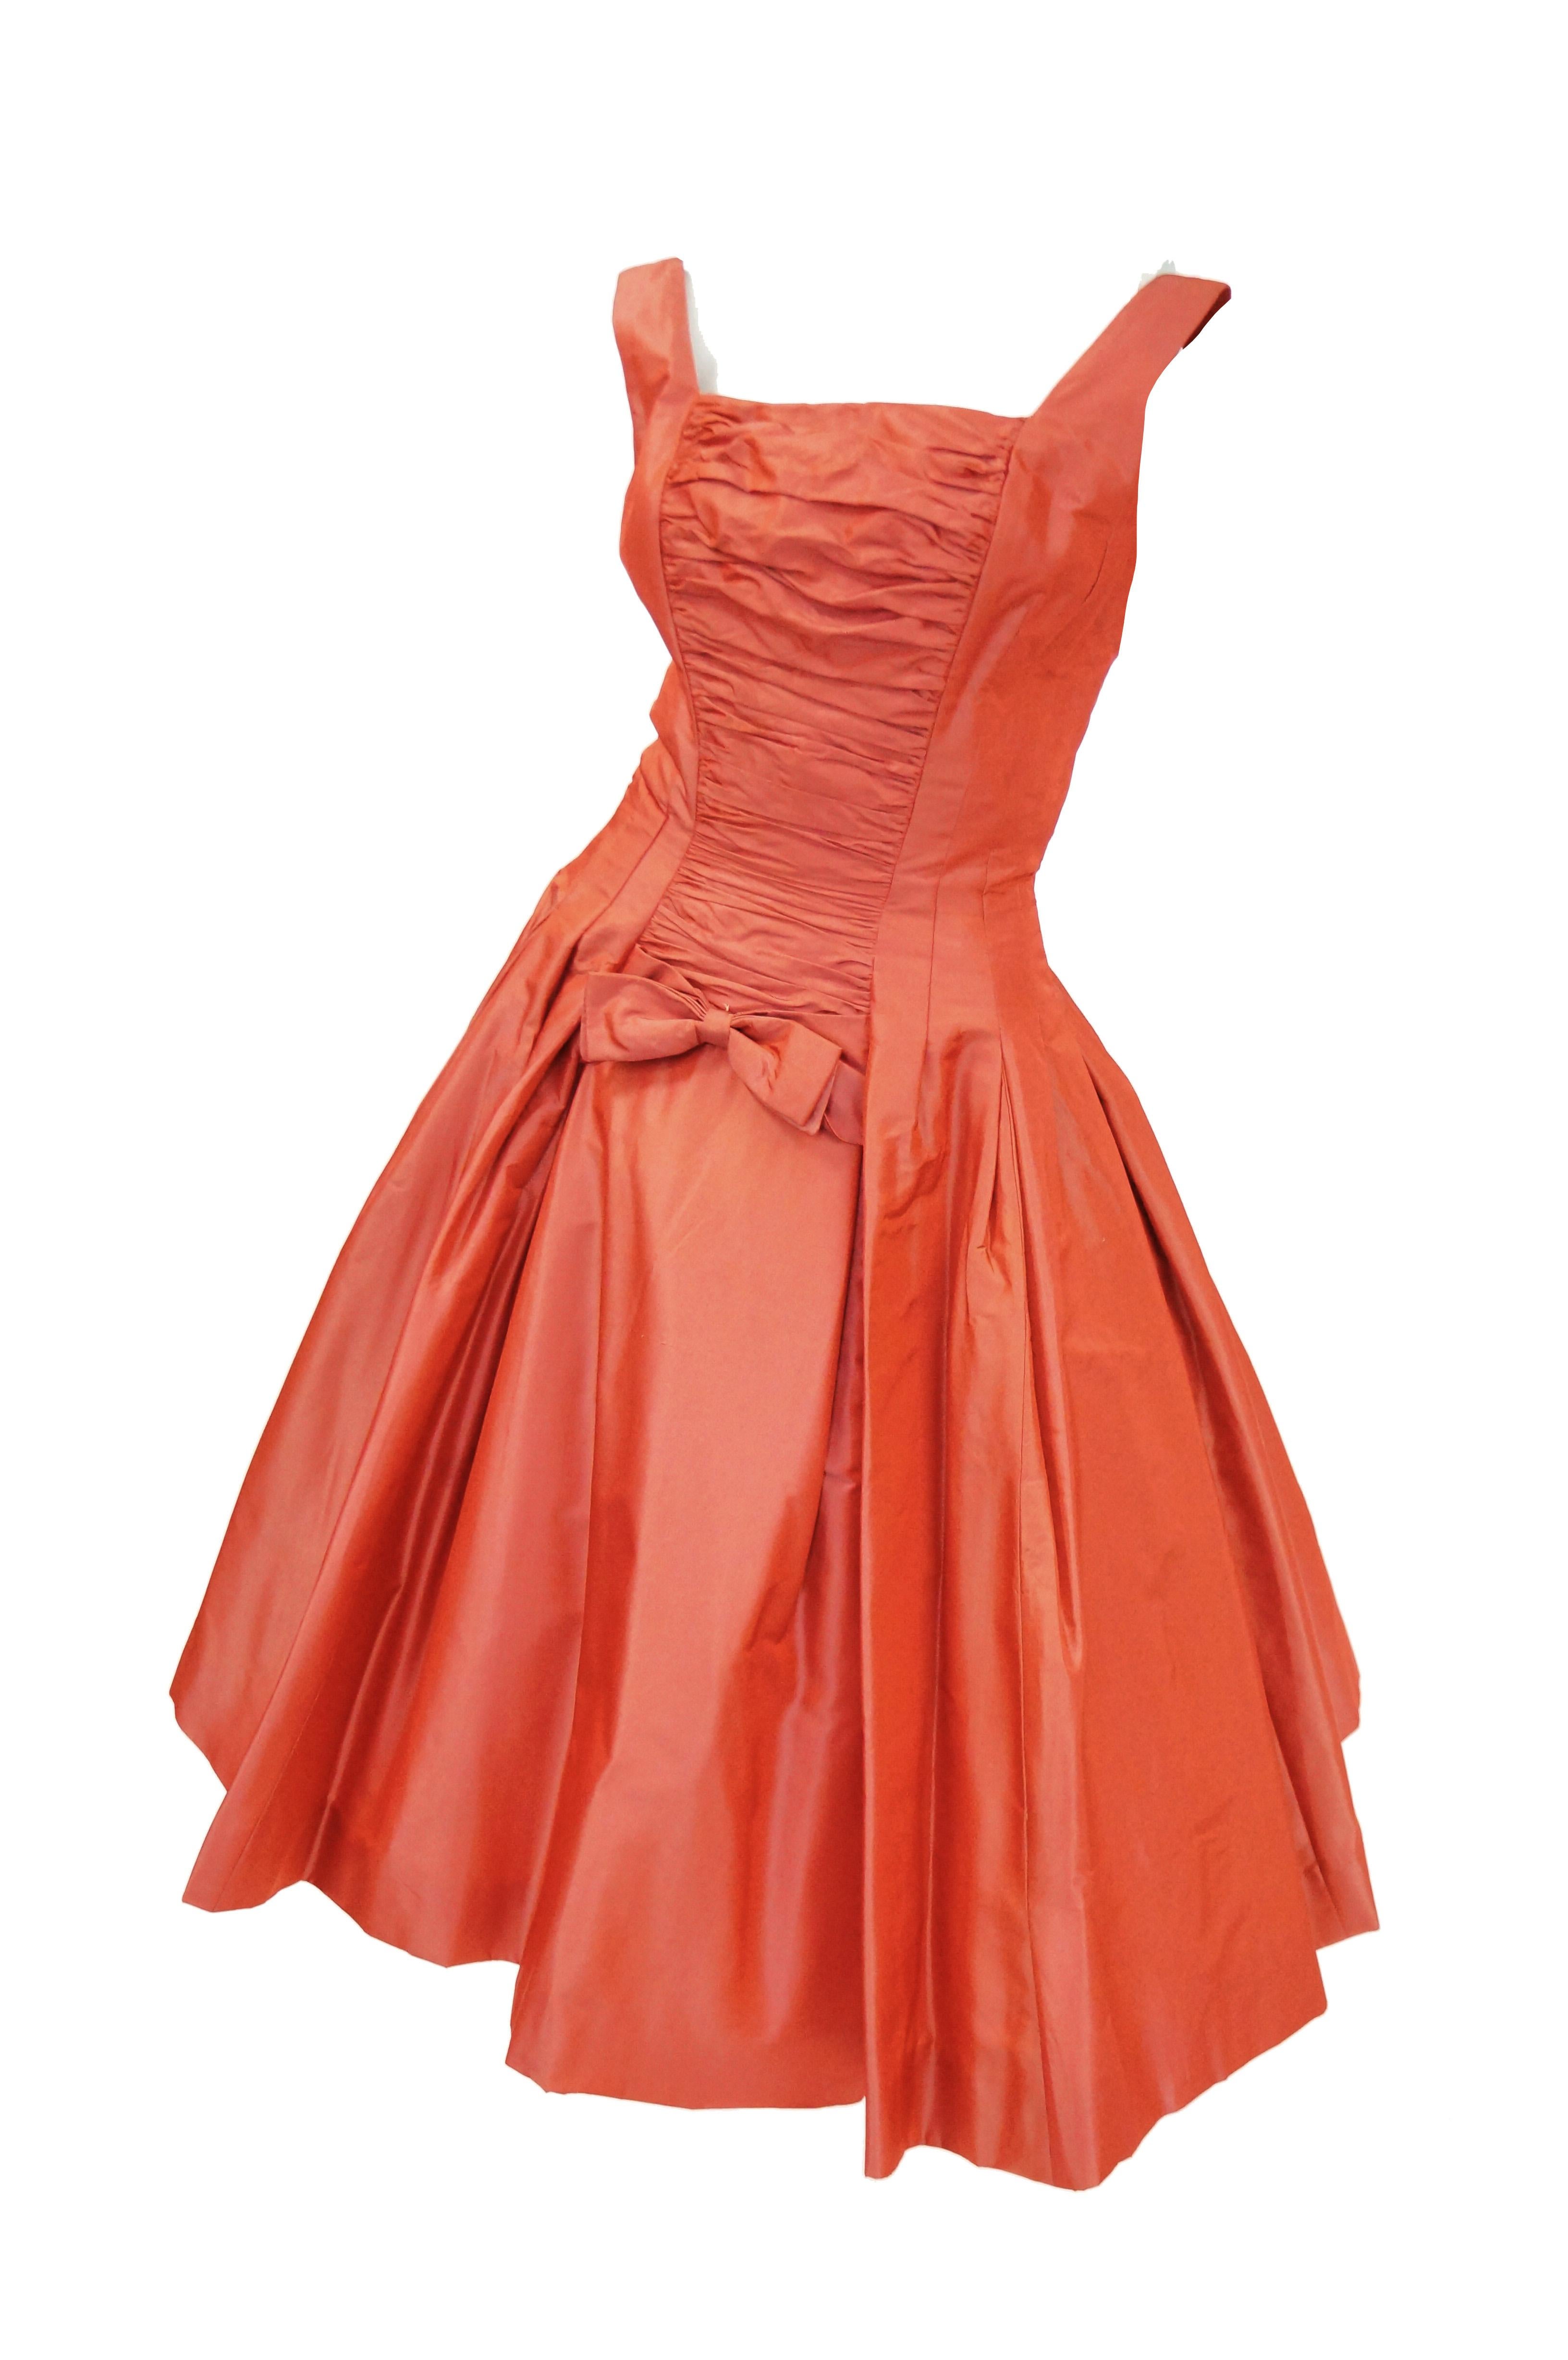 1950s Suzy Perette Red Charmeuse Satin New Look Evening Dress with Bow Detail 2